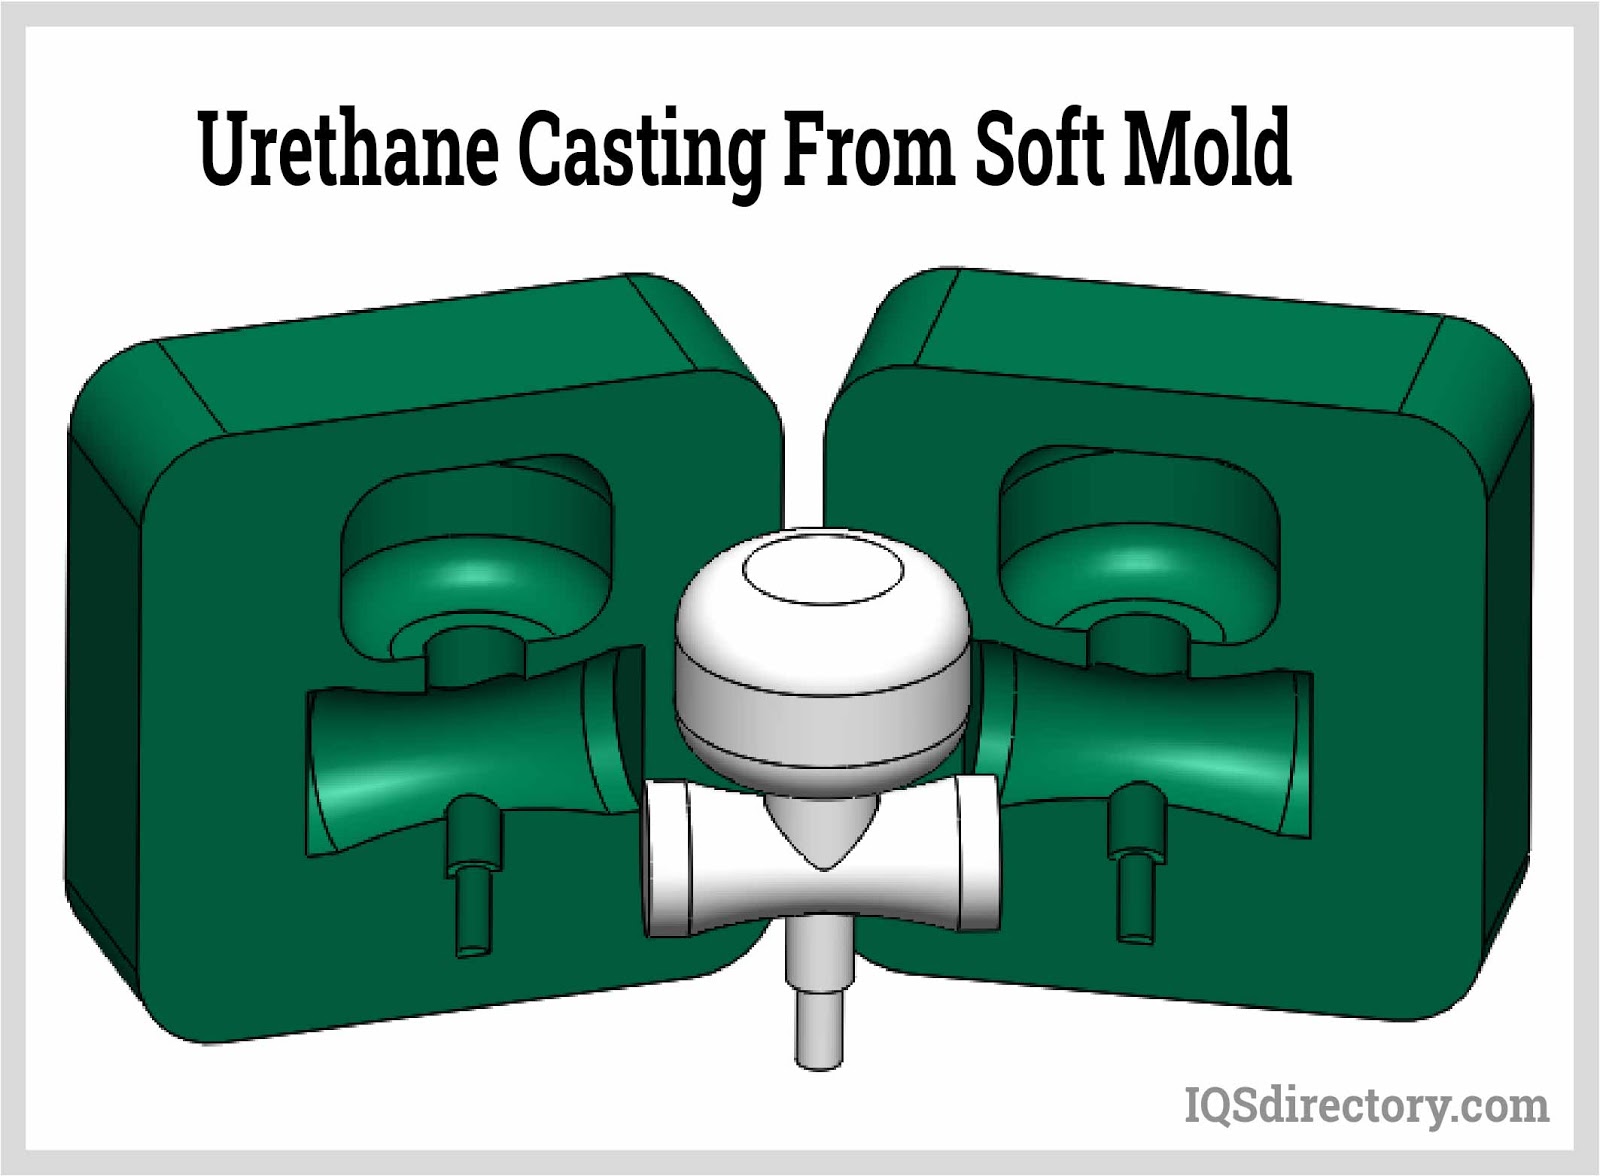 Urethane Casting from Soft Mold